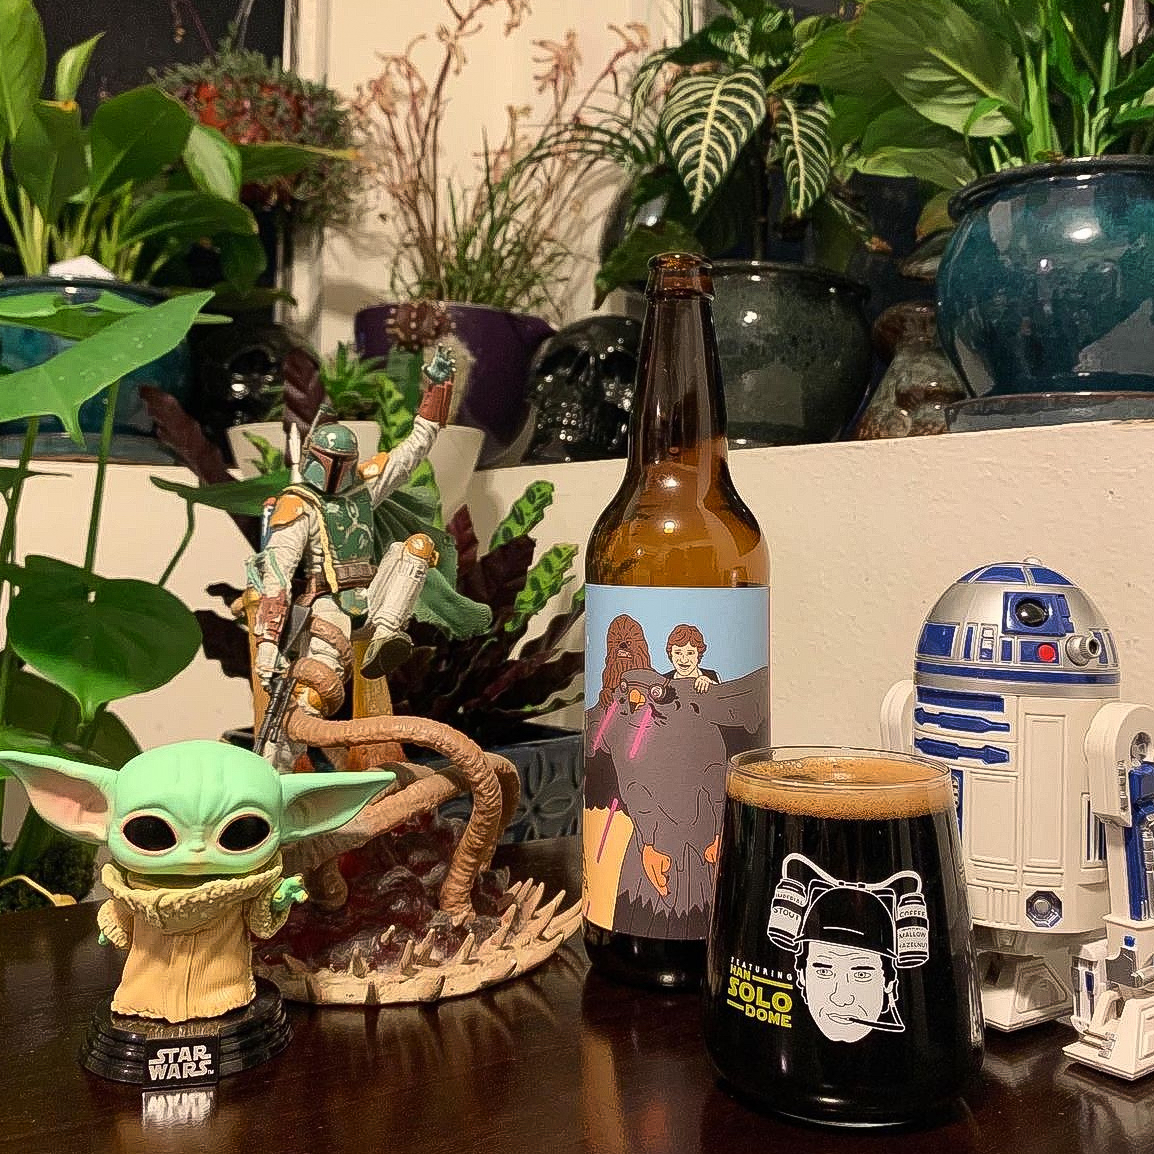 May the Fourth be with you! 🌌⚔️ Star Wars has to be one of the most beloved franchises in the world. As big fans ourselves, we love seeing the craft beer world celebrate this historic universe. Enjoy a few of our favorite Star Wars-themed beers, and shout out your favs below!